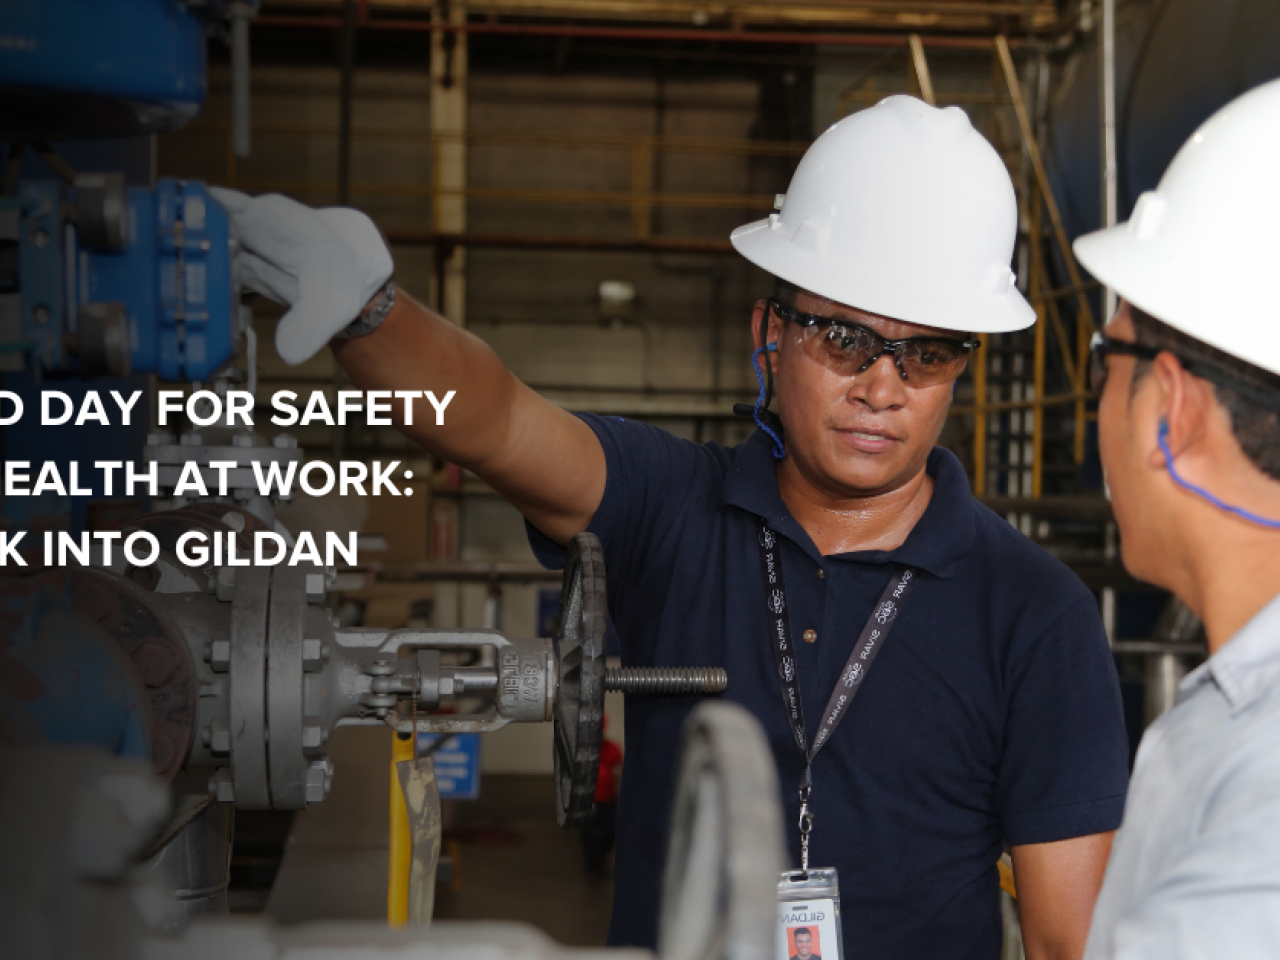 Two Gildan employees wearing safety equipment, interacting on the factory floor